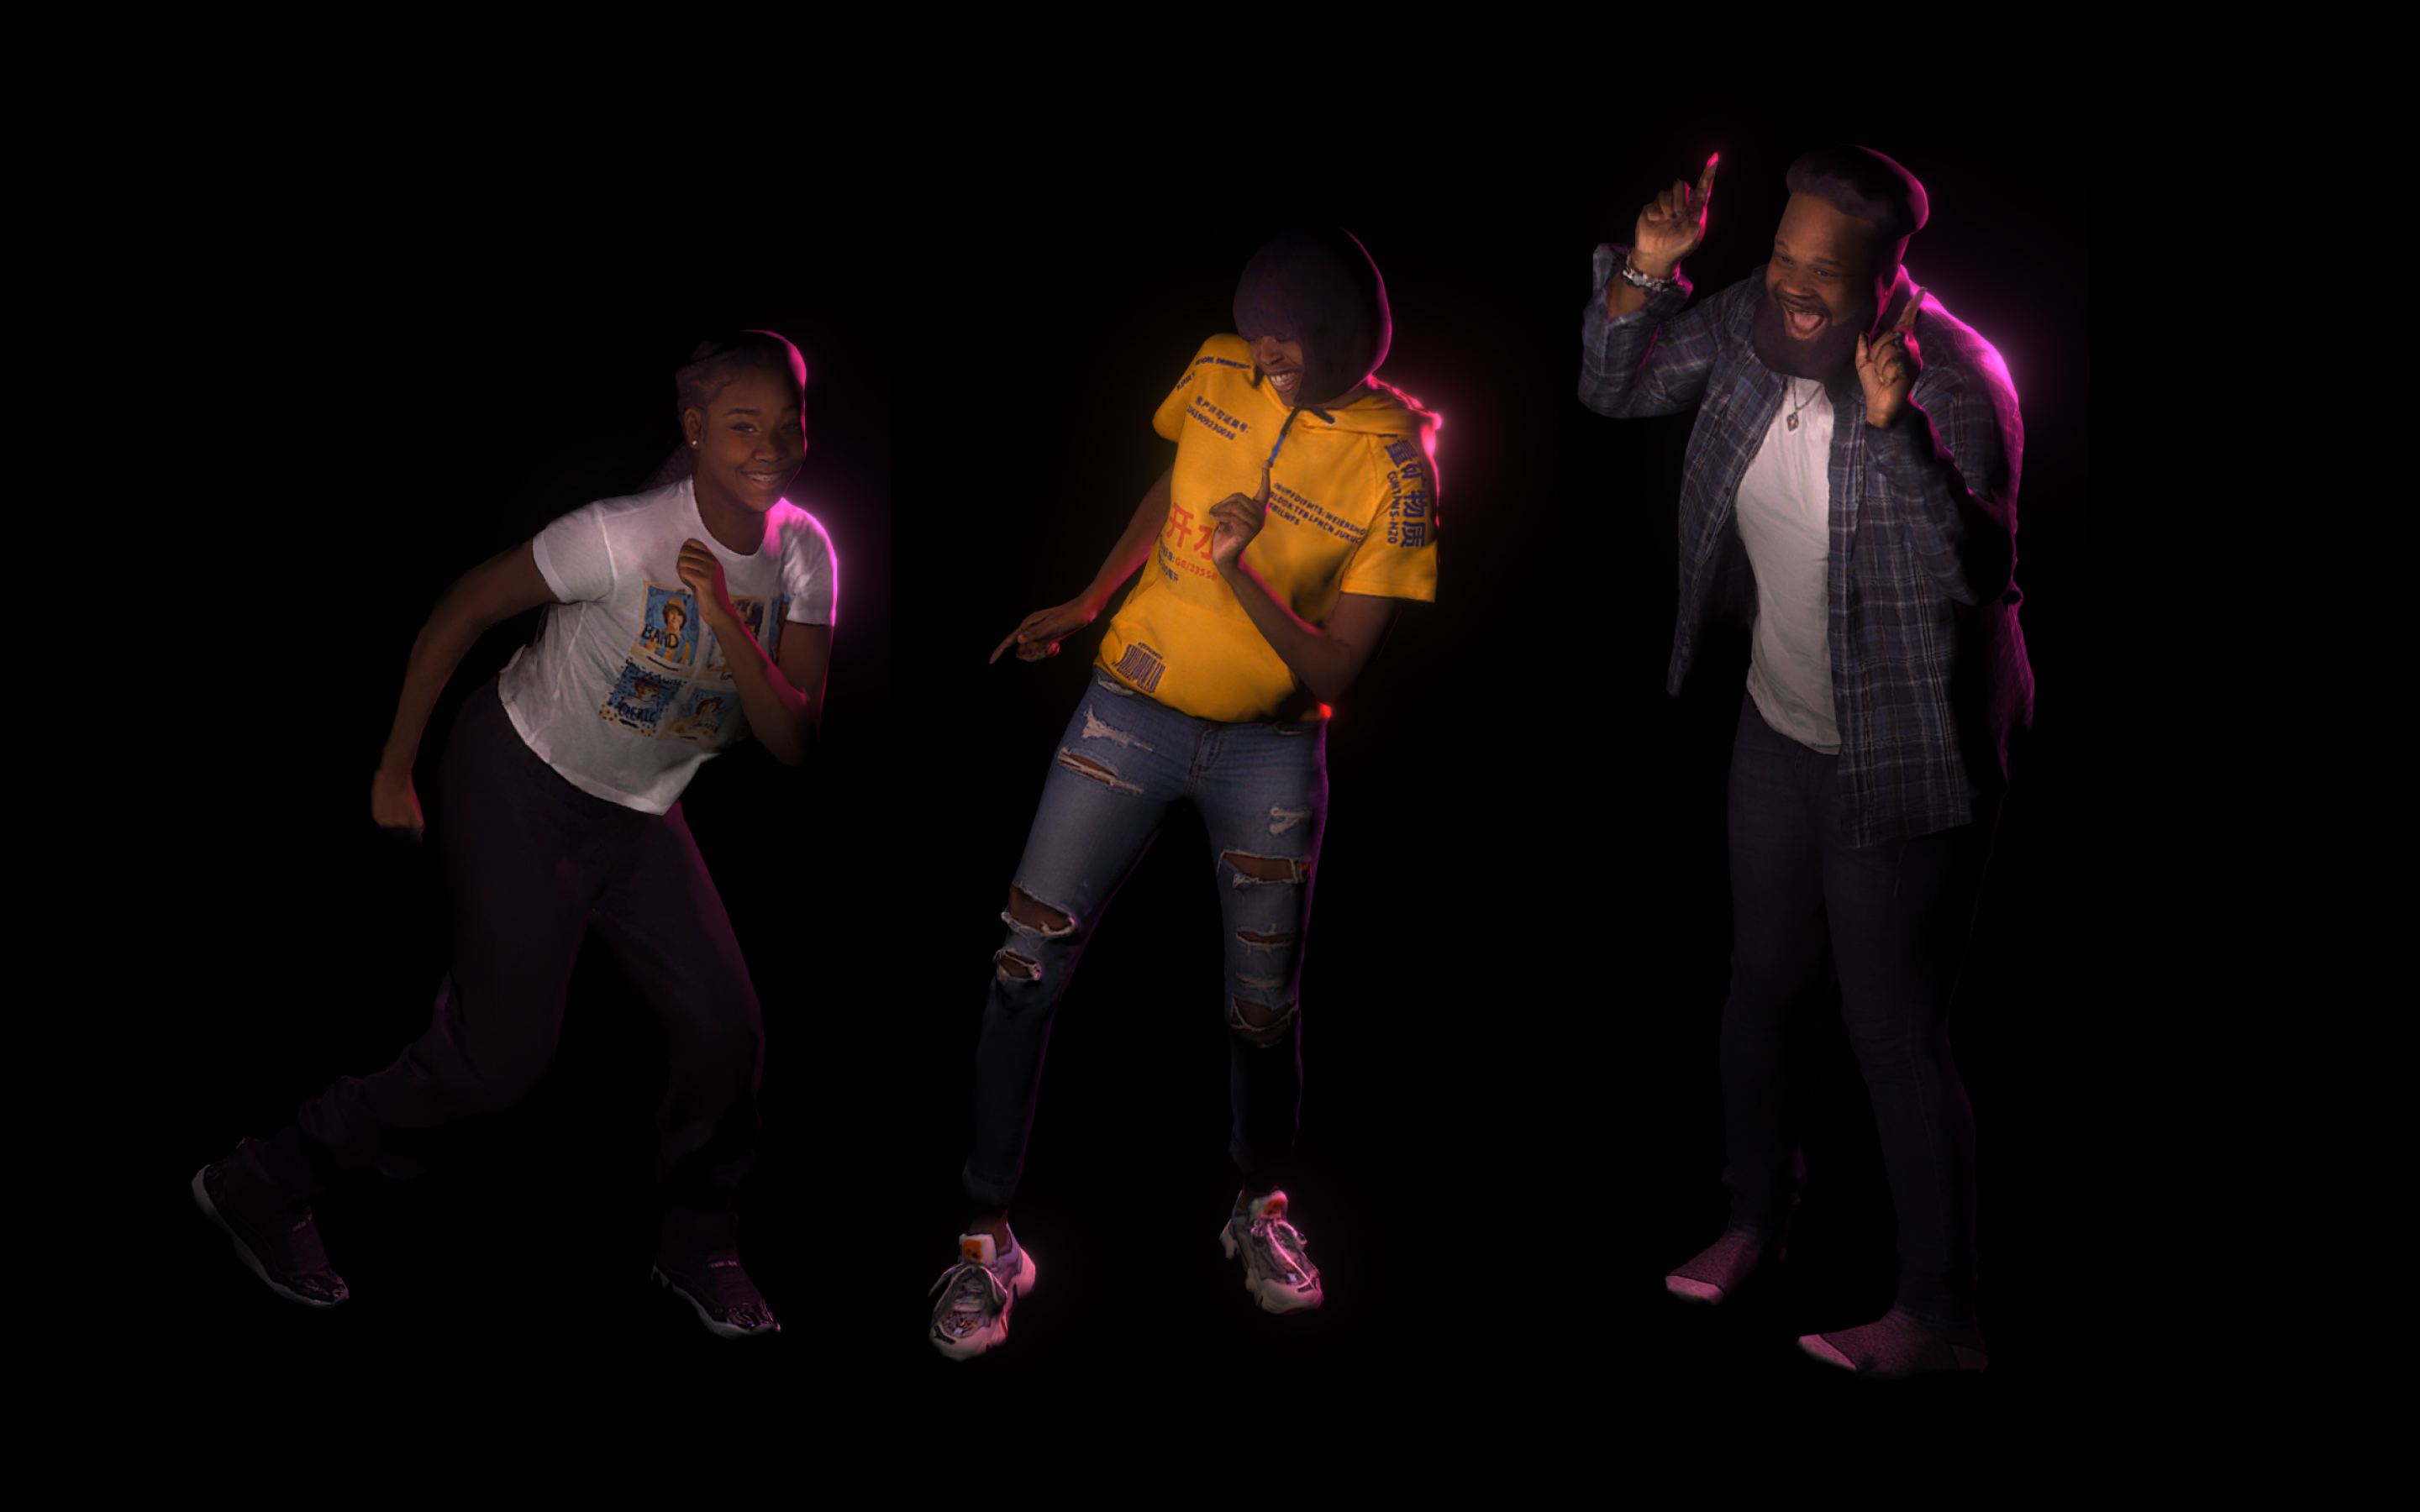 Black Viral TikTok Artists Immortalized As NFT Holograms In Honor Of Juneteenth